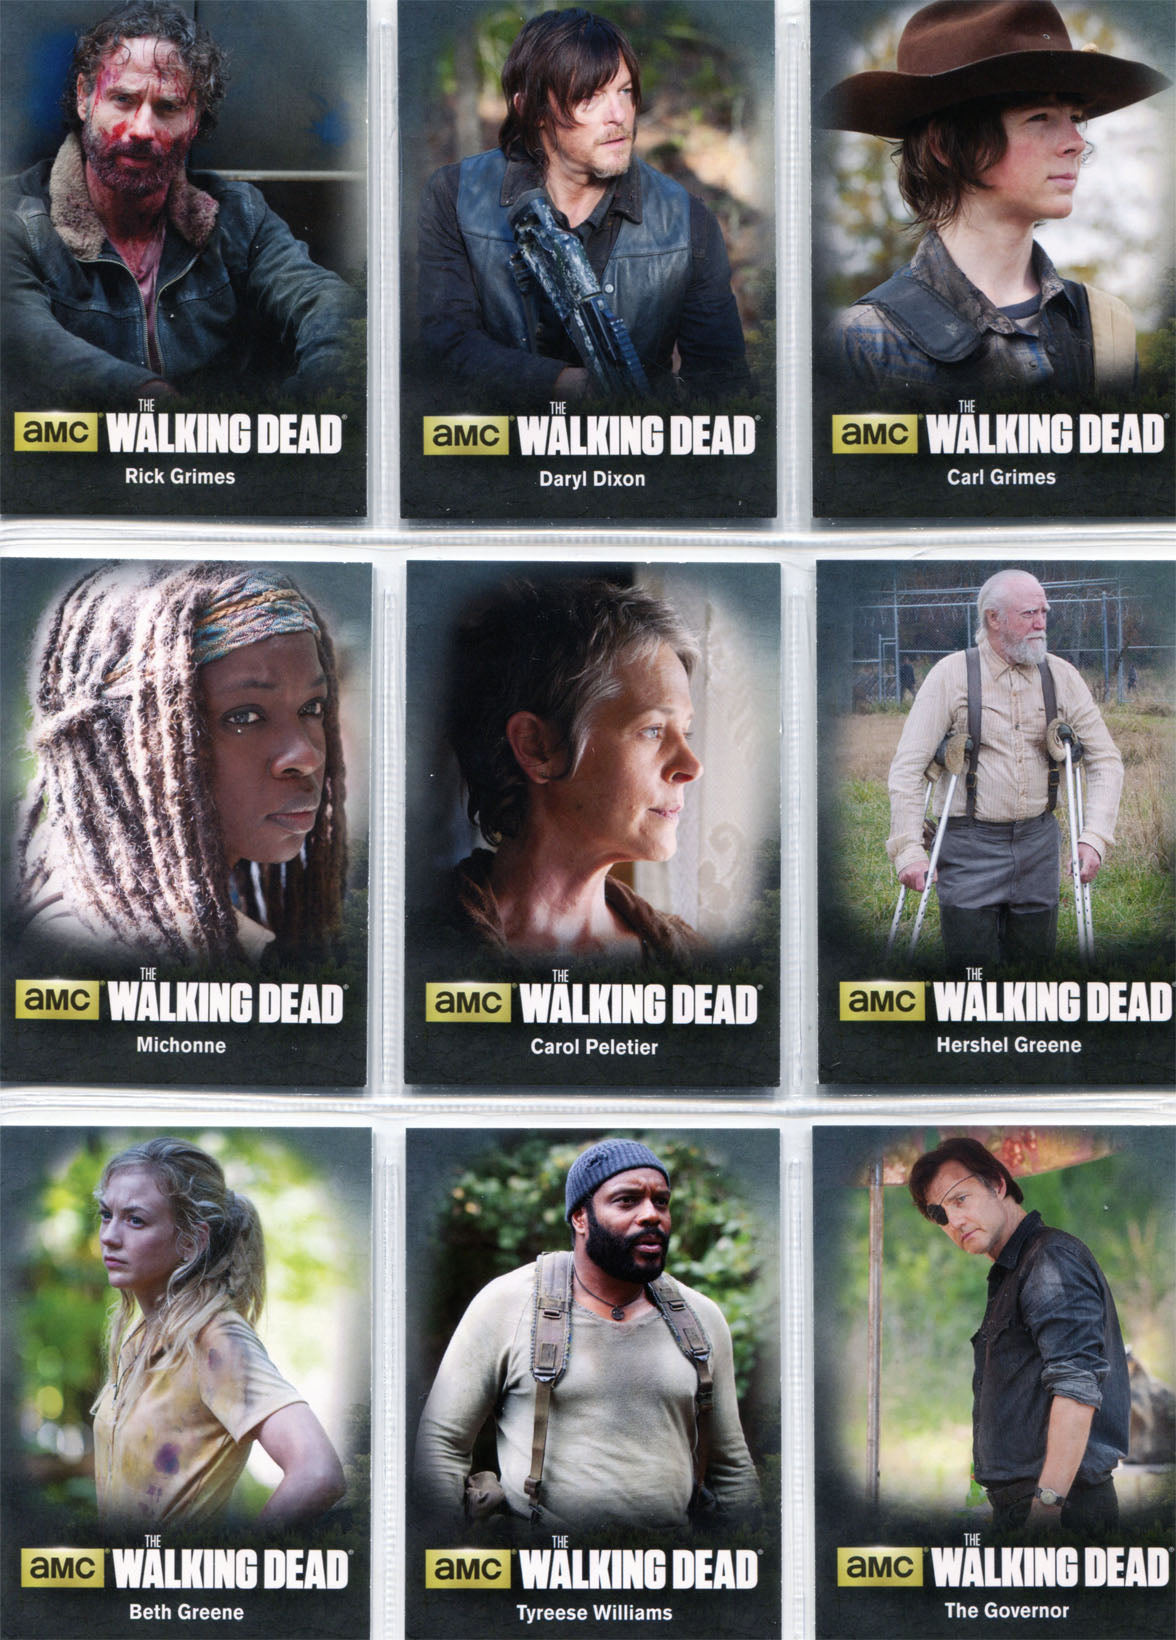 Walking Dead Season 4 Part 1 Character Bios Complete 9 Chase Card Set C01 to C09